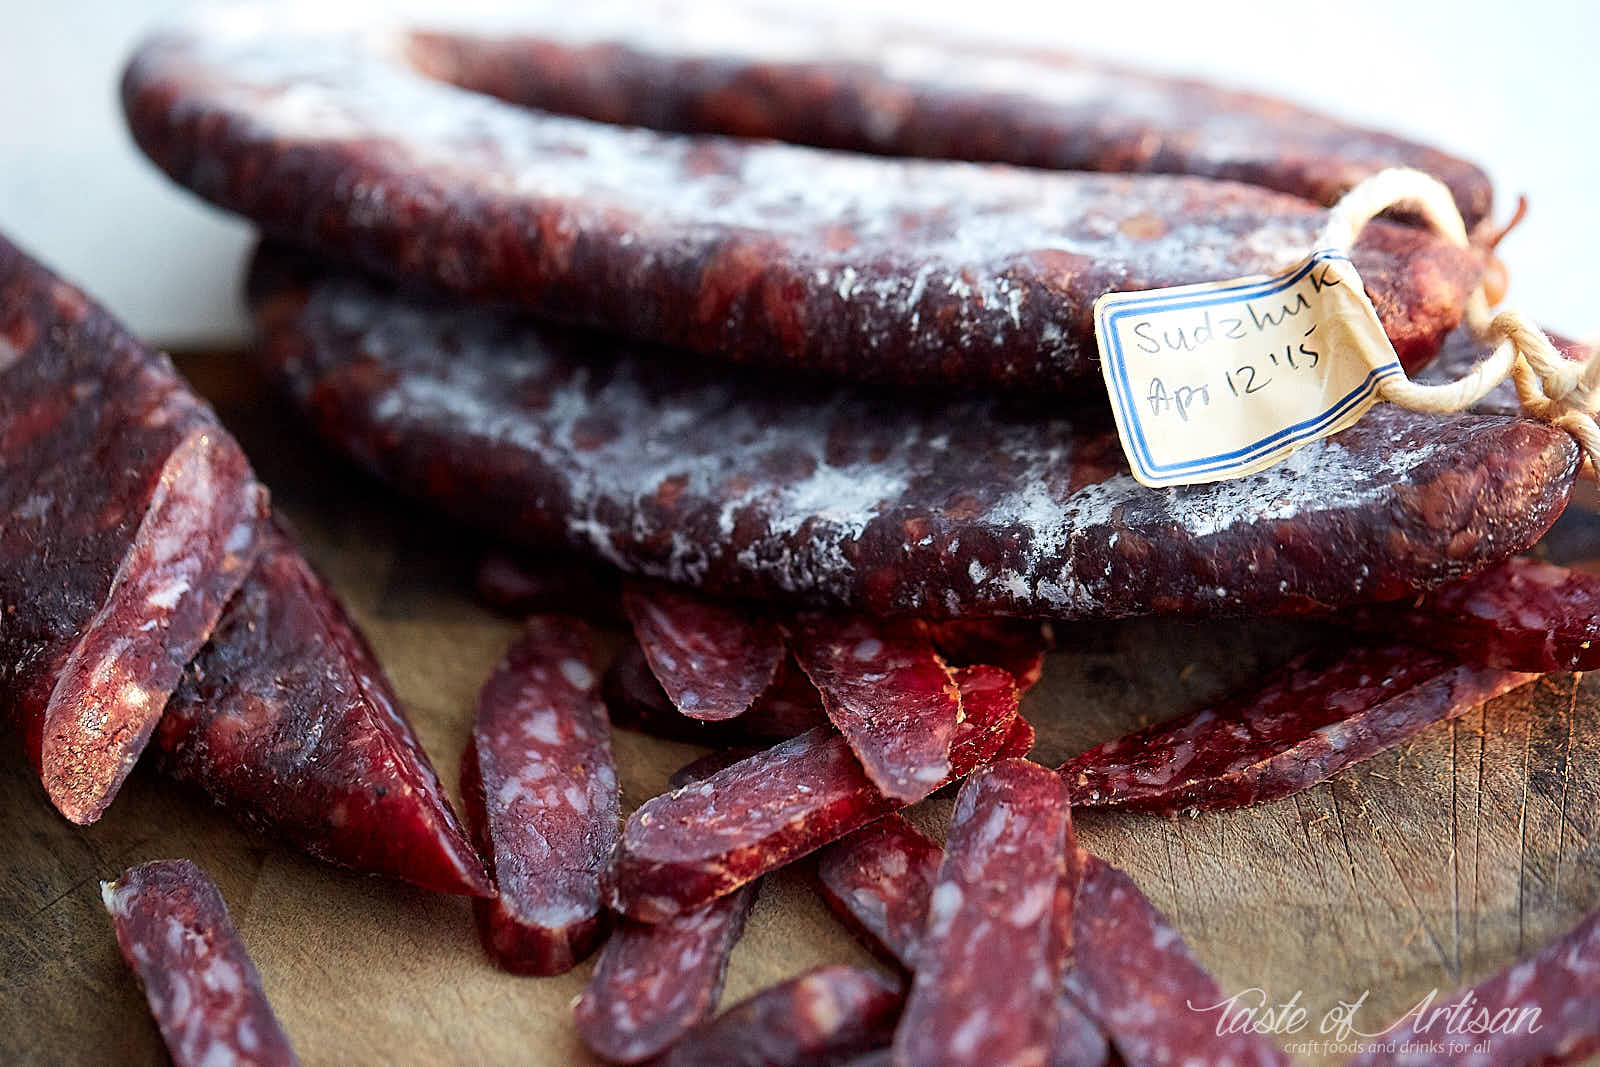 Homemade sujuk (sudzhuk, sojuk) - dry cured beef sausage made from scratch - absolutely delicious. | Taste of Artisan